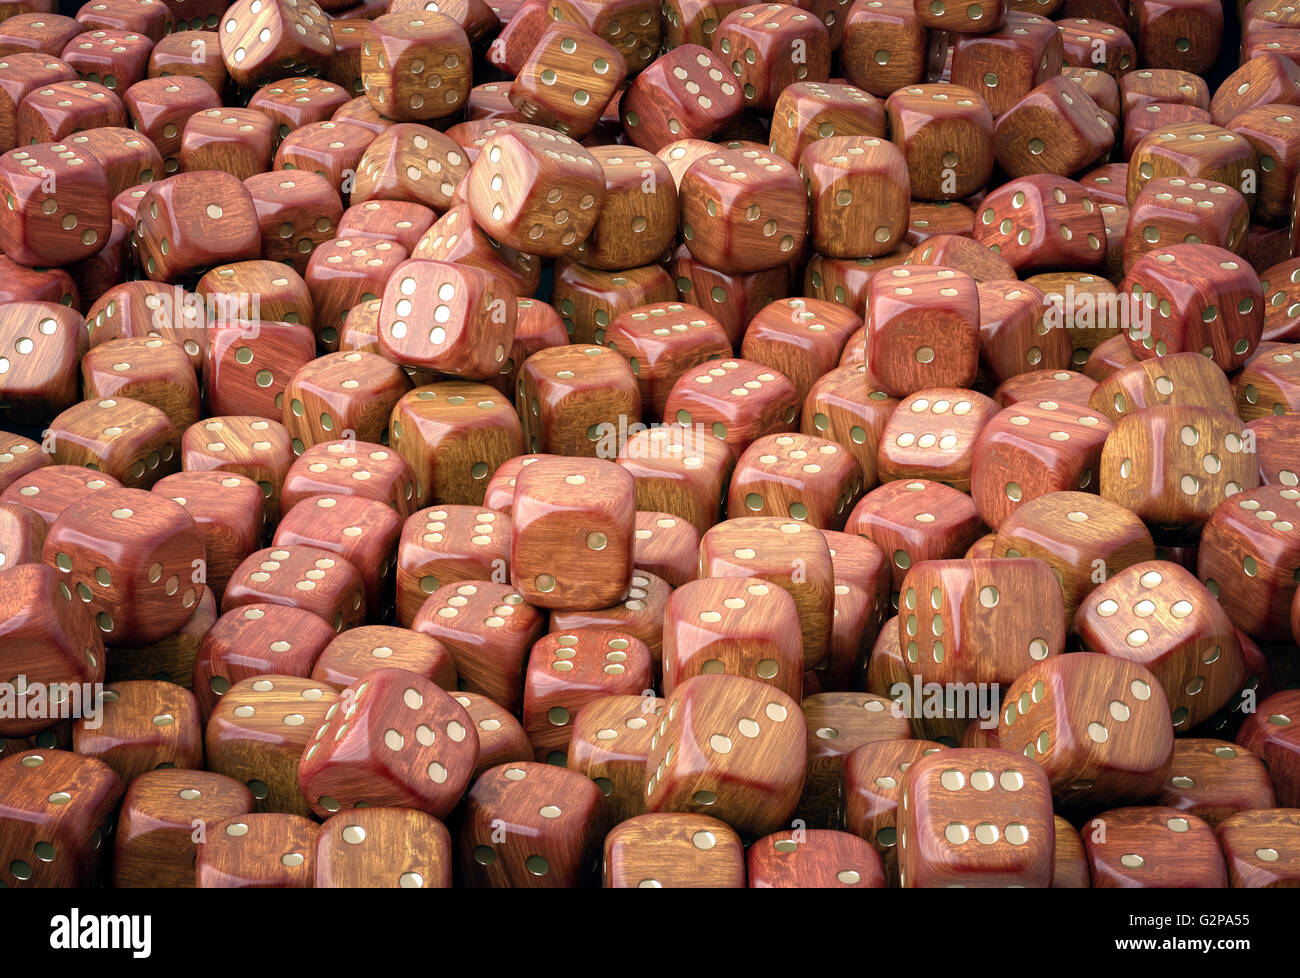 Pile of wooden dice Stock Photo